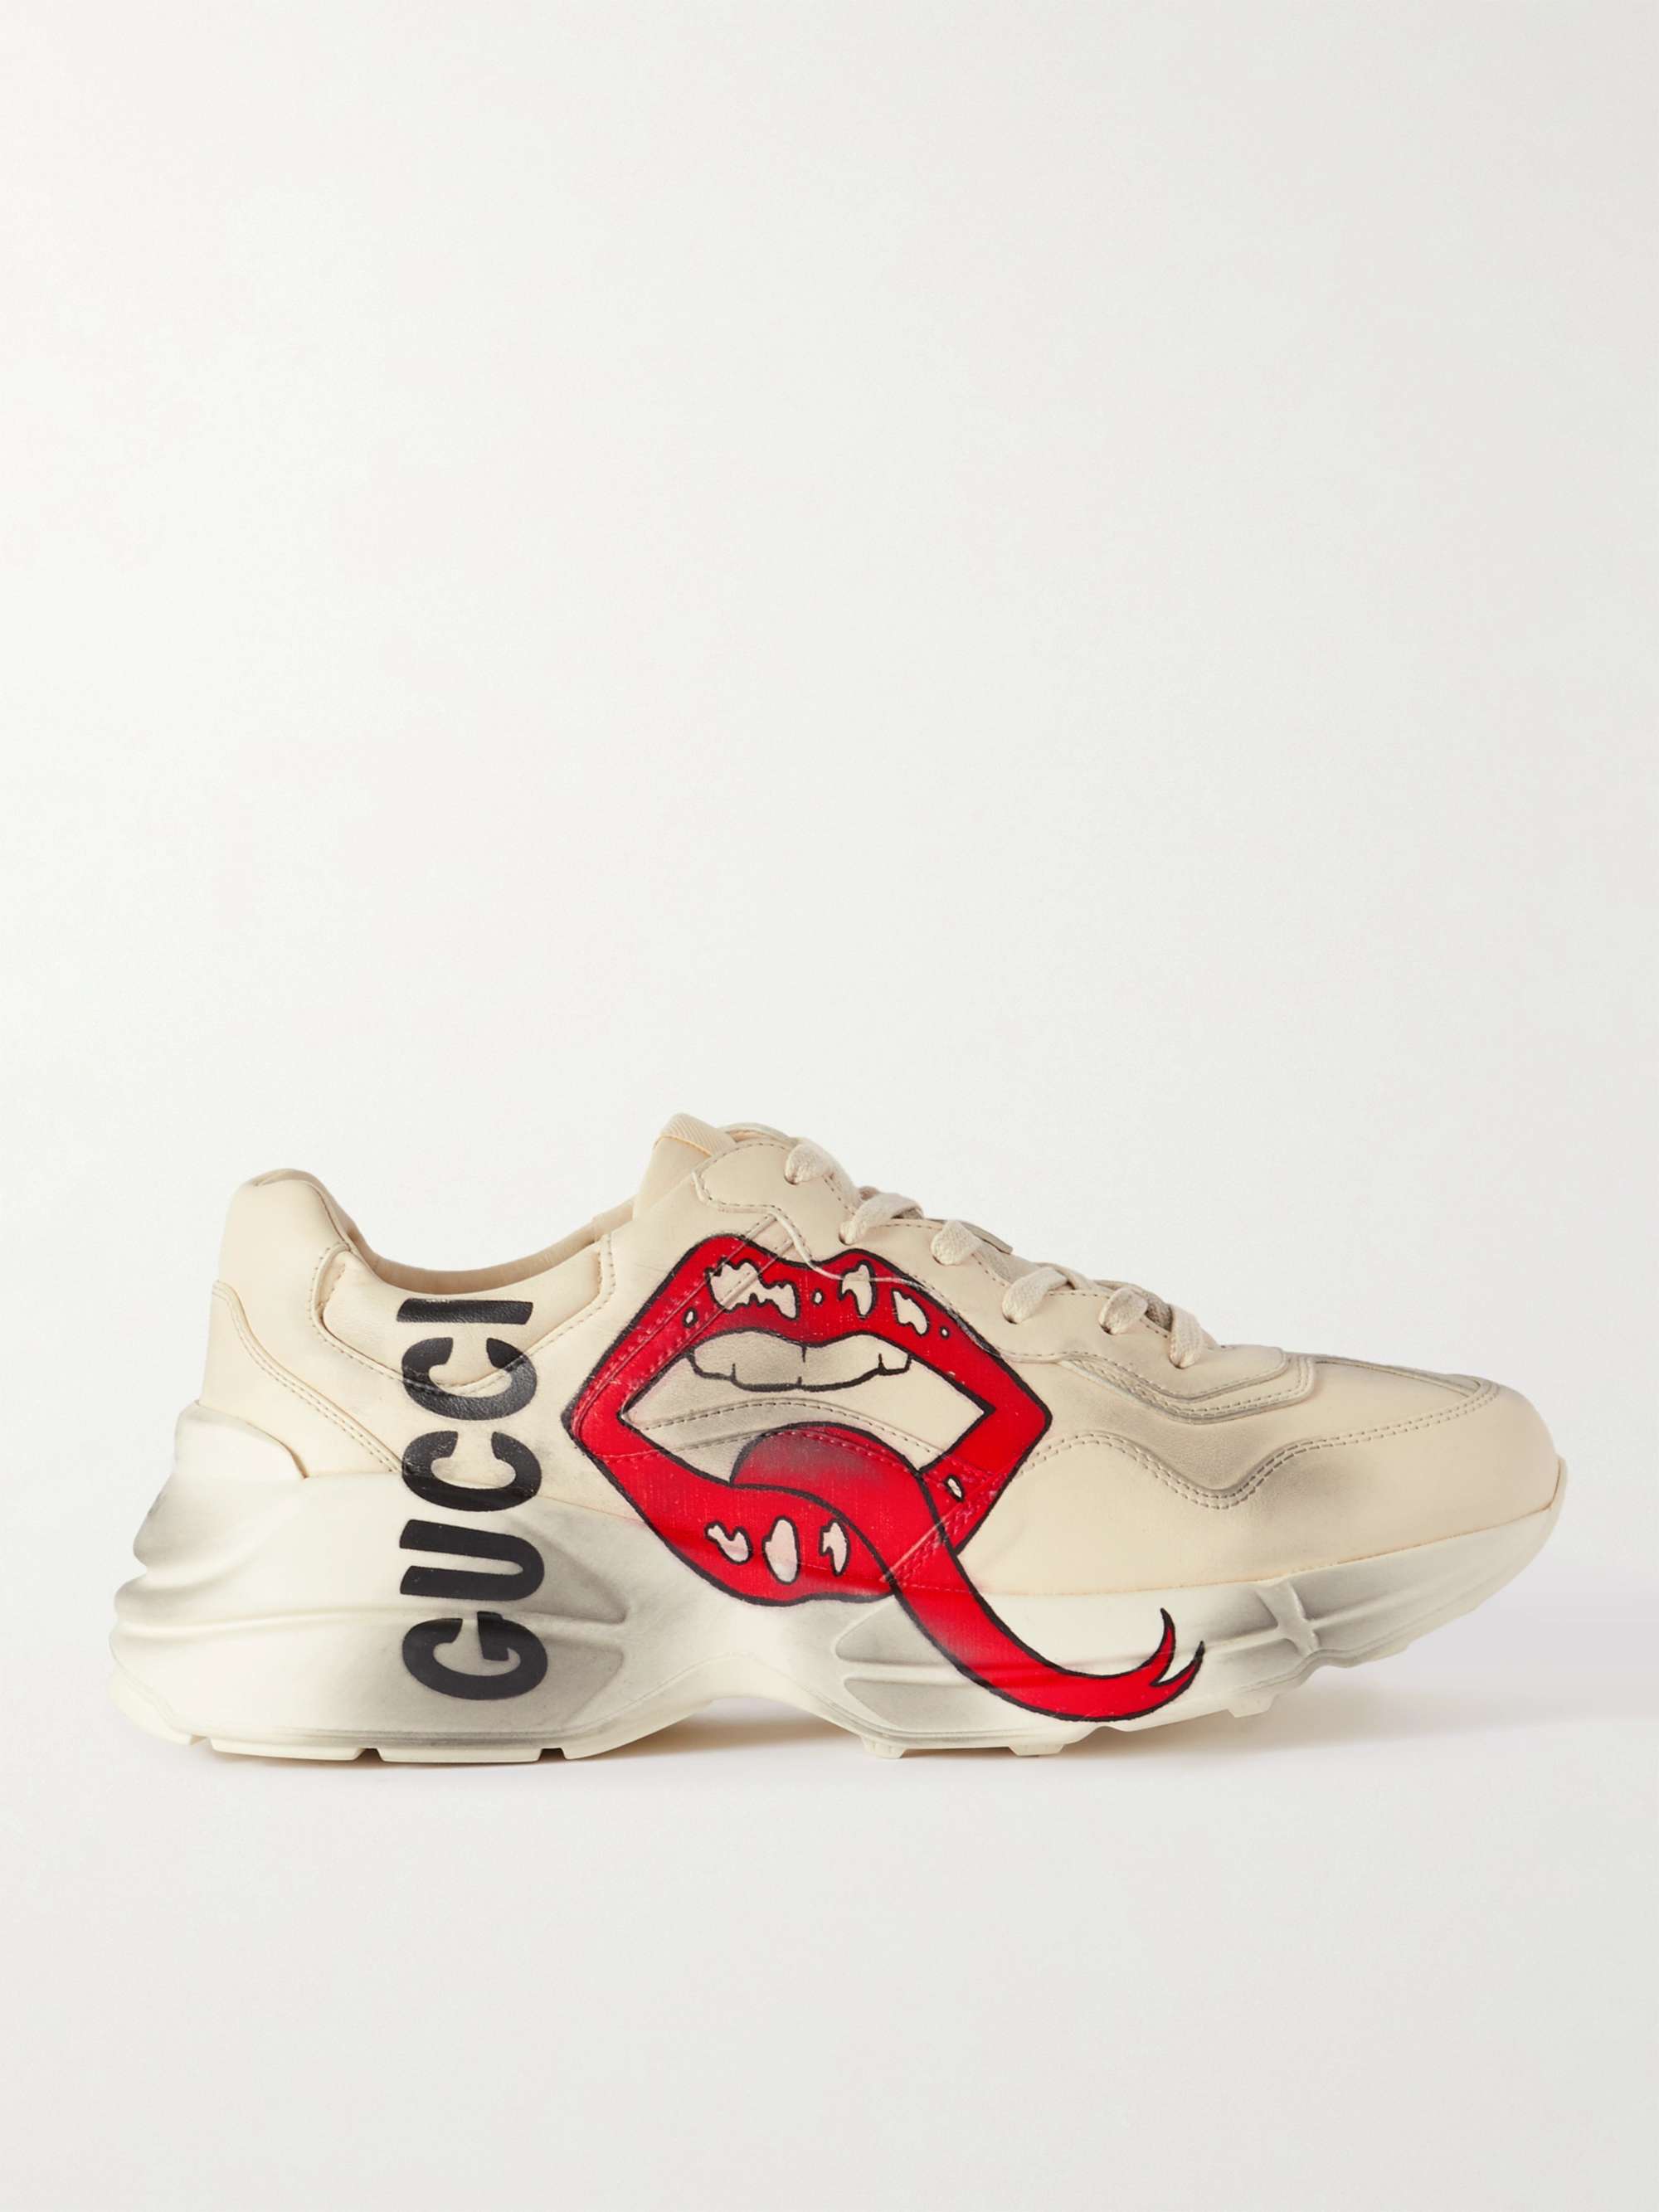 GUCCI Rhyton Distressed Printed Leather Sneakers | MR PORTER